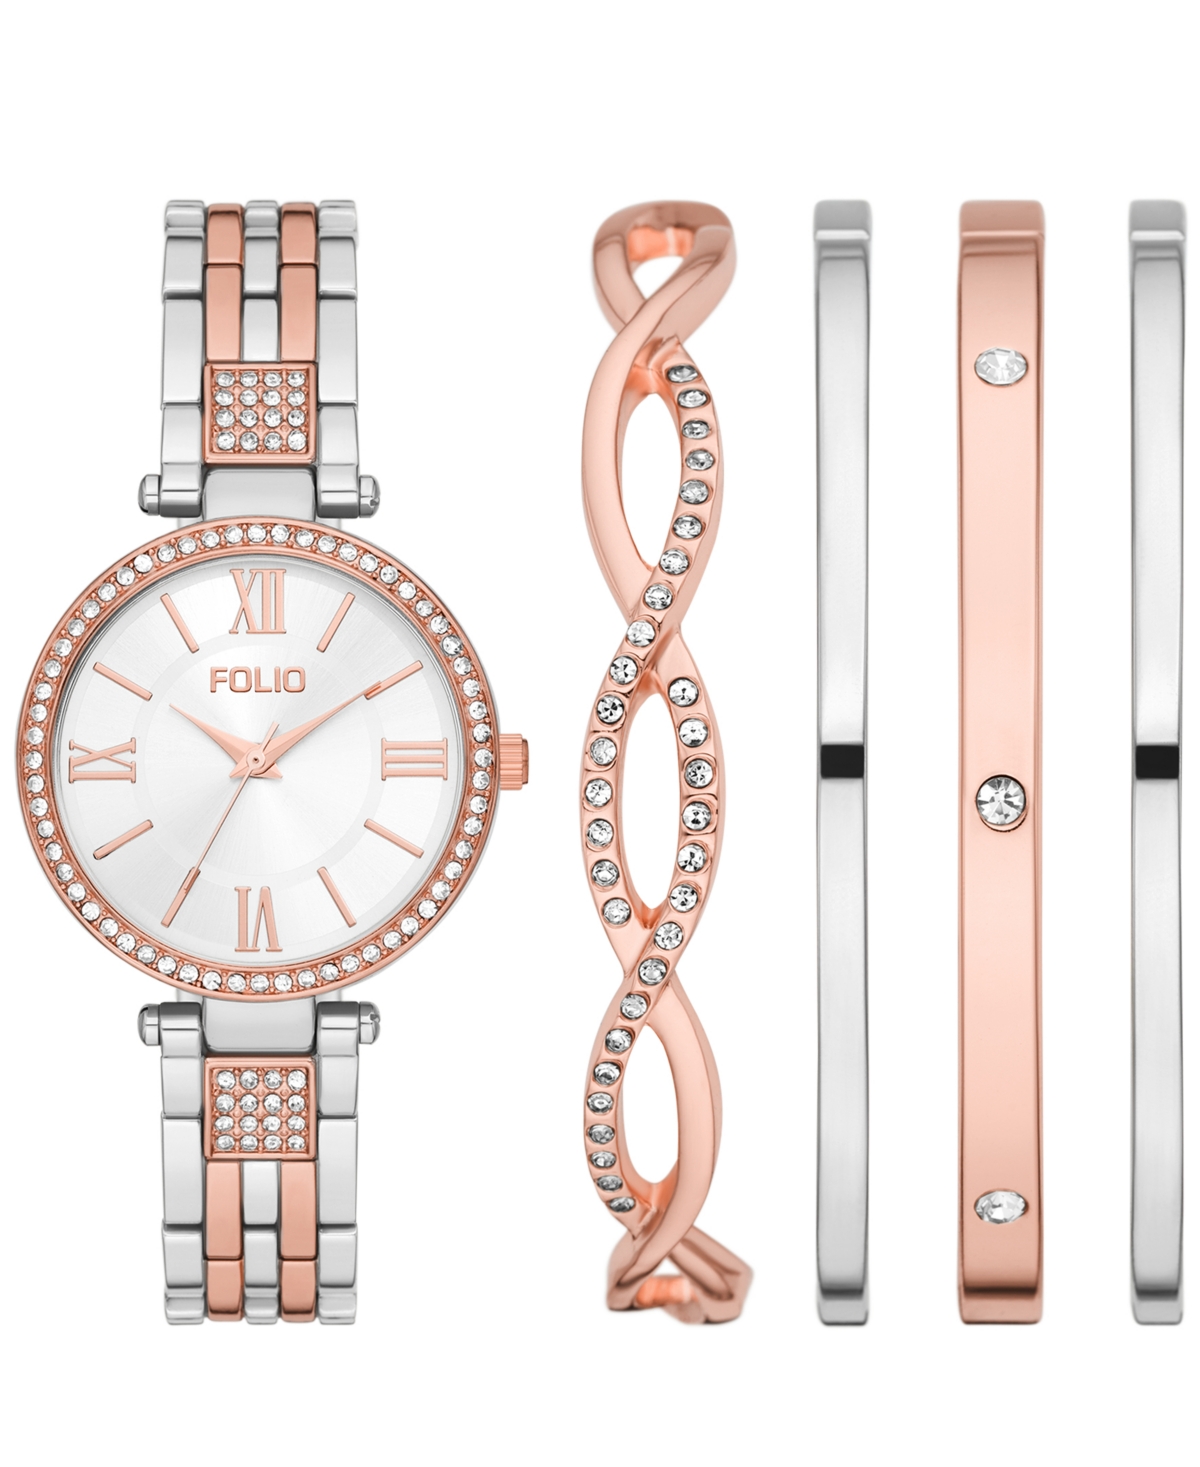 Women's Three Hand Two-Tone 34mm Watch and Bracelet Gift Set, 5 Pieces - Two Tone